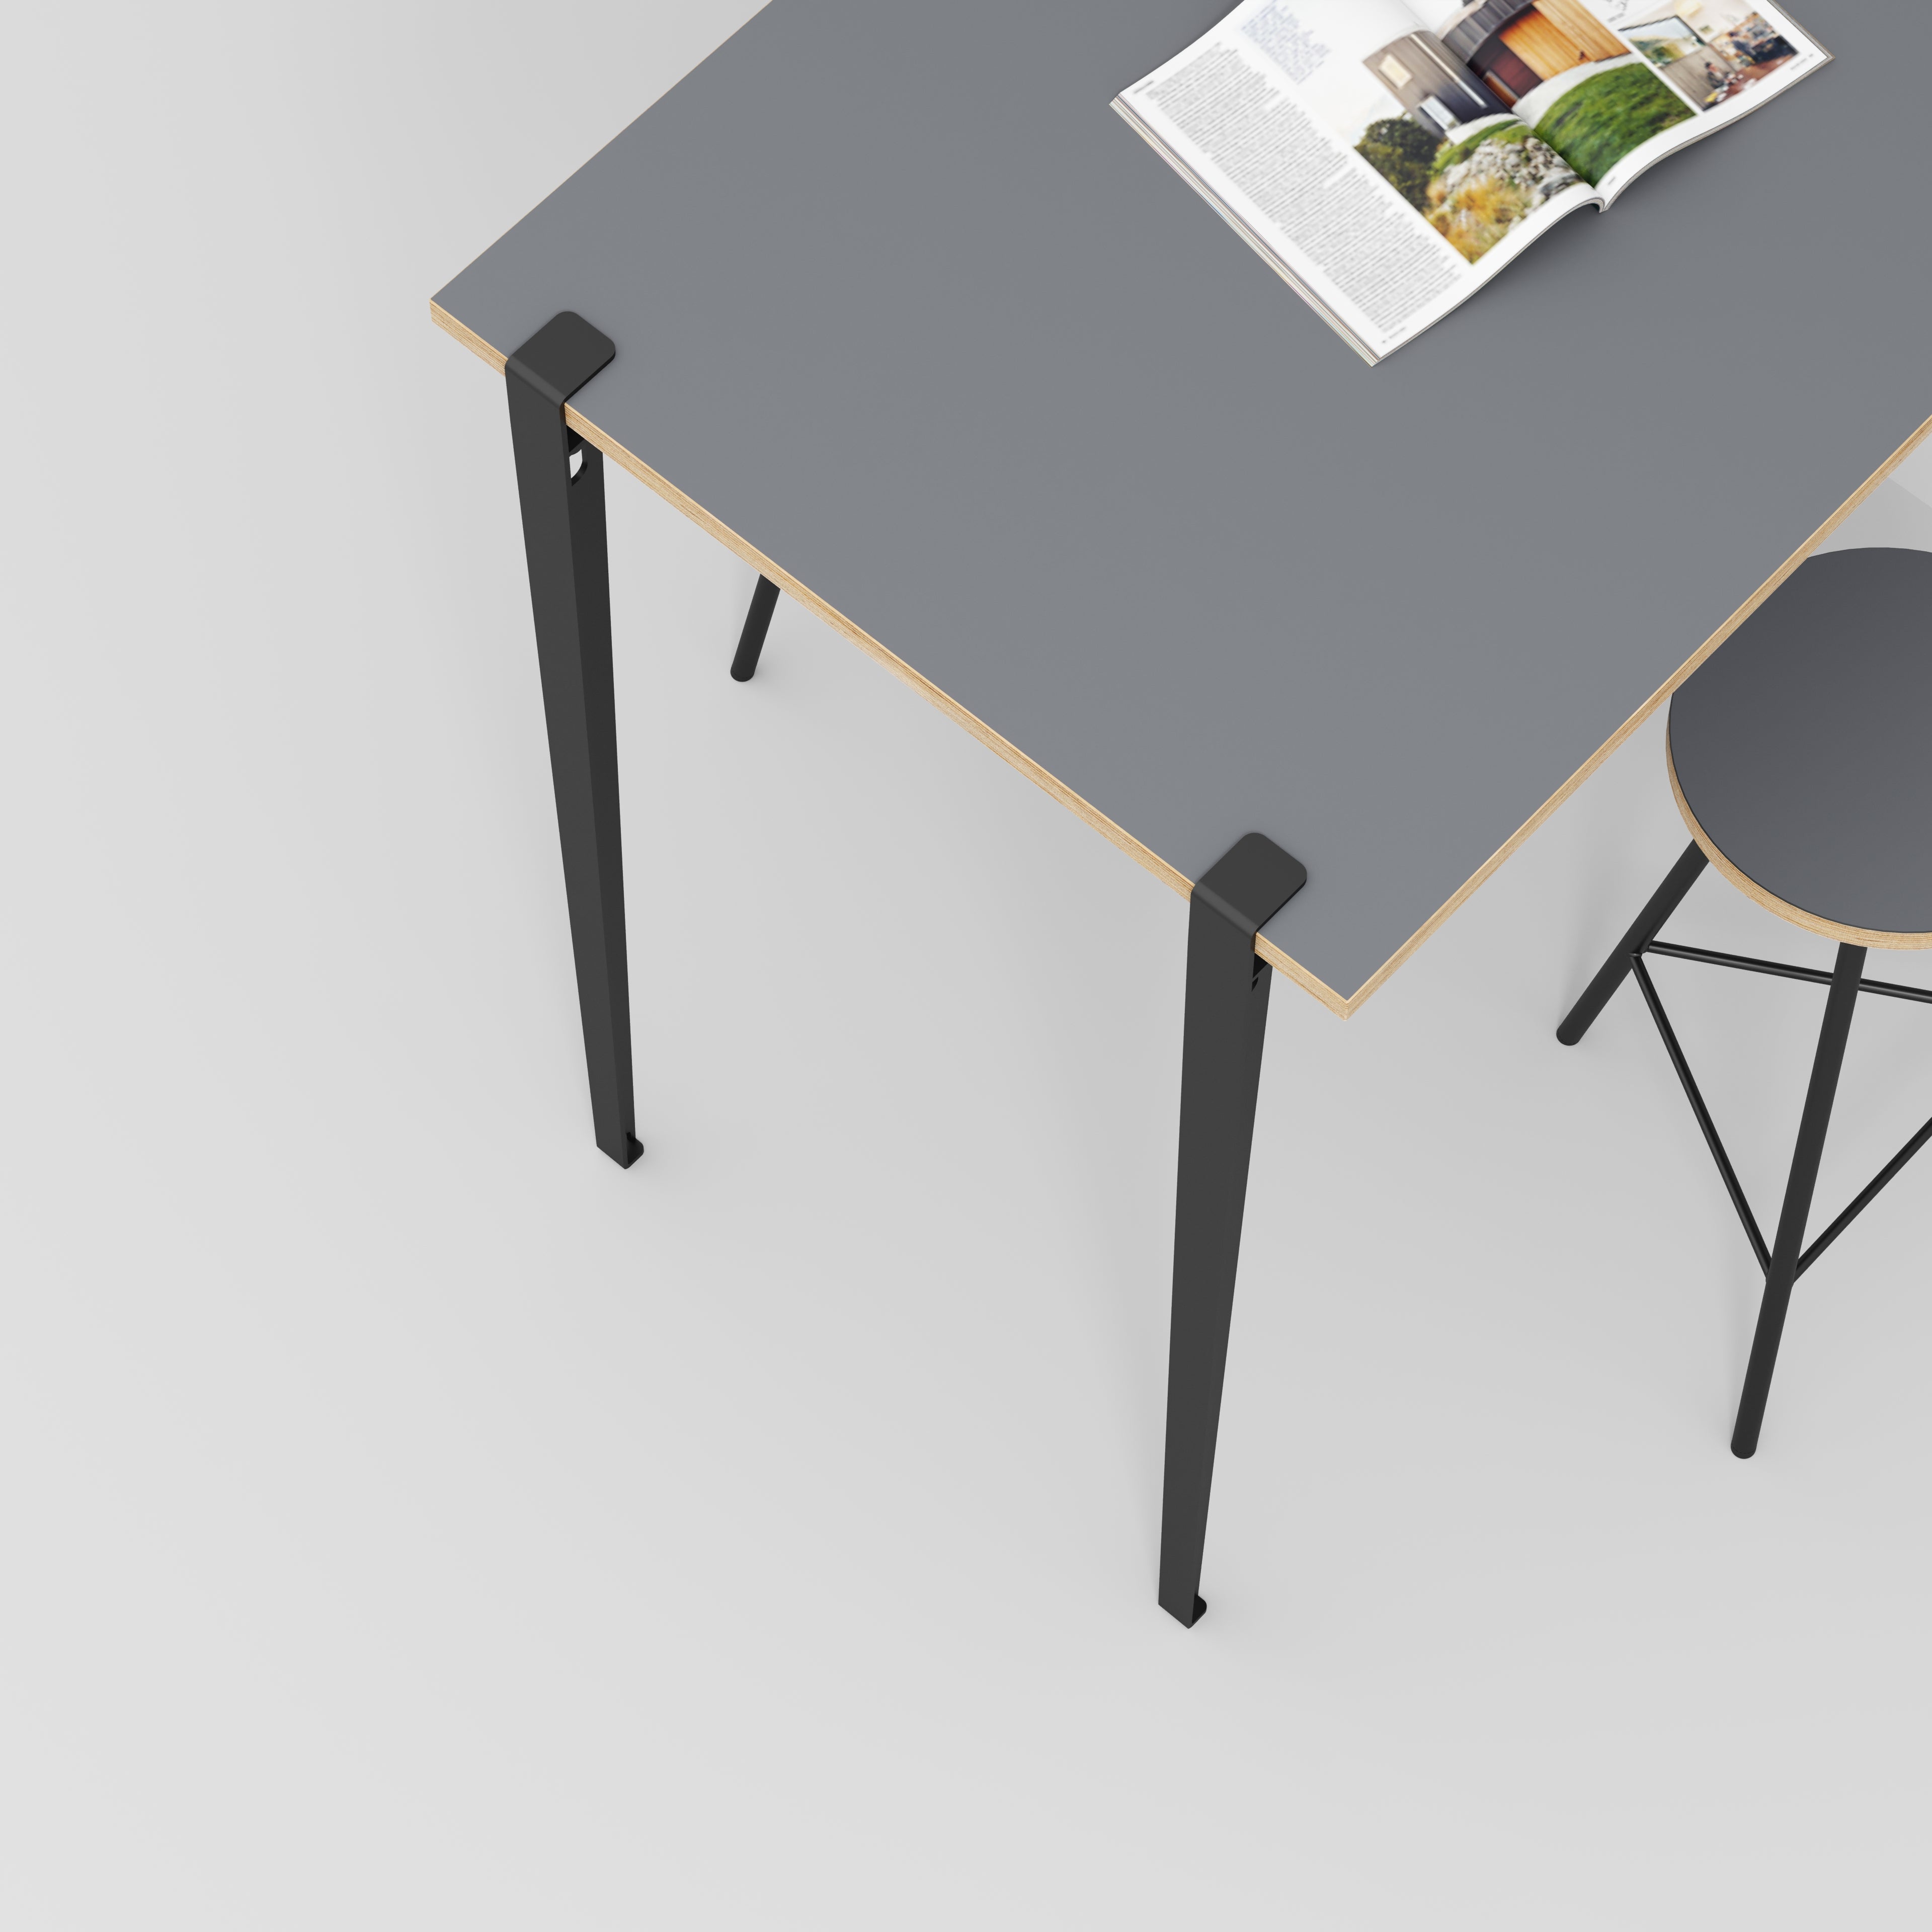 Wall Table with Black Tiptoe Legs and Brackets - Formica Tornado Grey - 1200(w) x 800(d) x 1100(h)